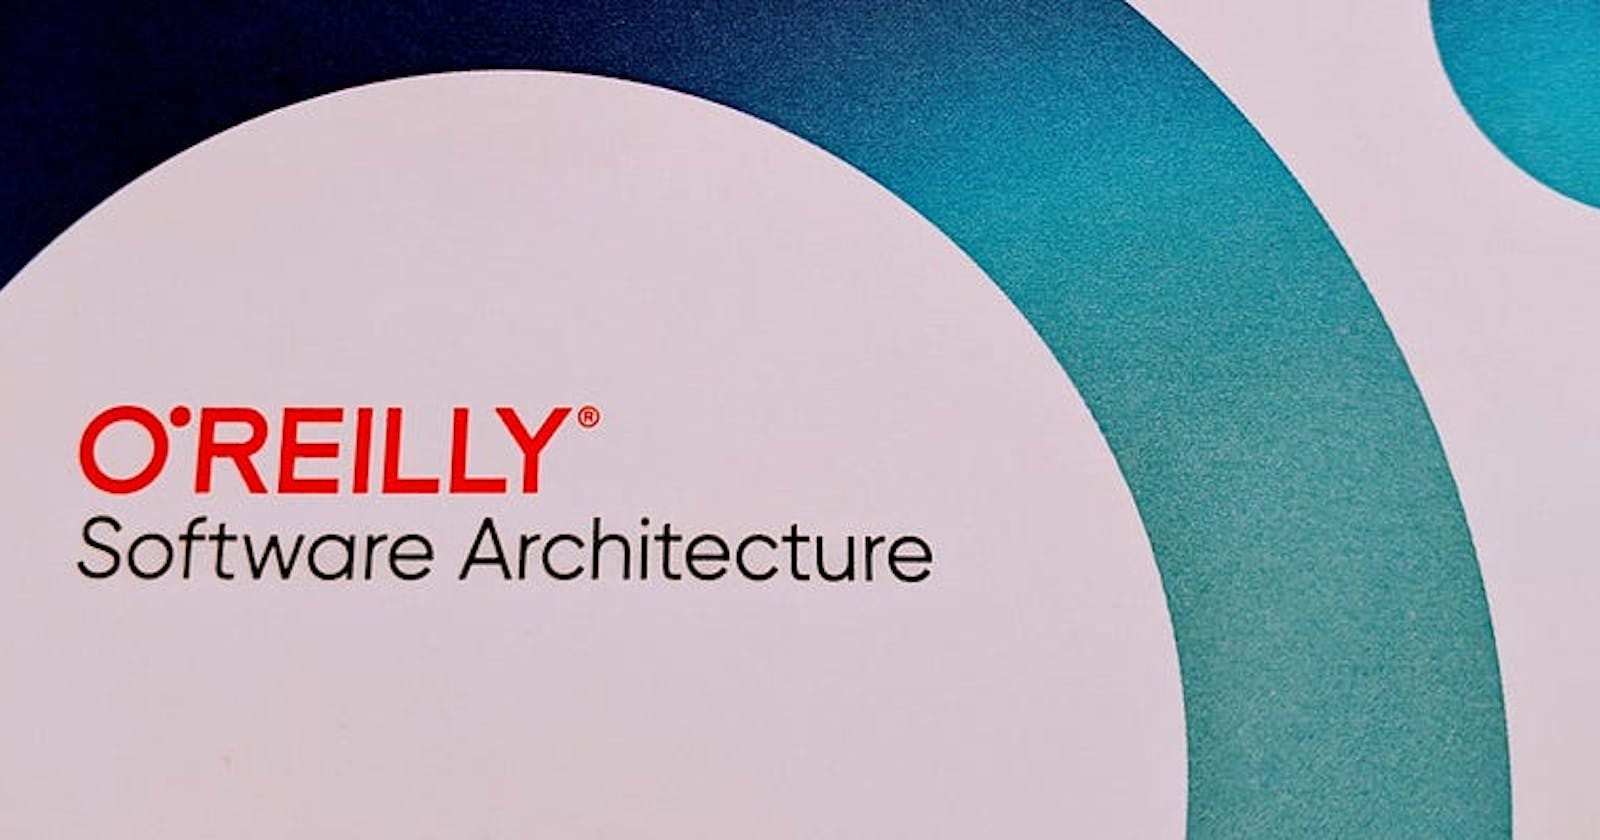 O’Reilly Software Architecture Conference 2020: A Young Engineer’s Review